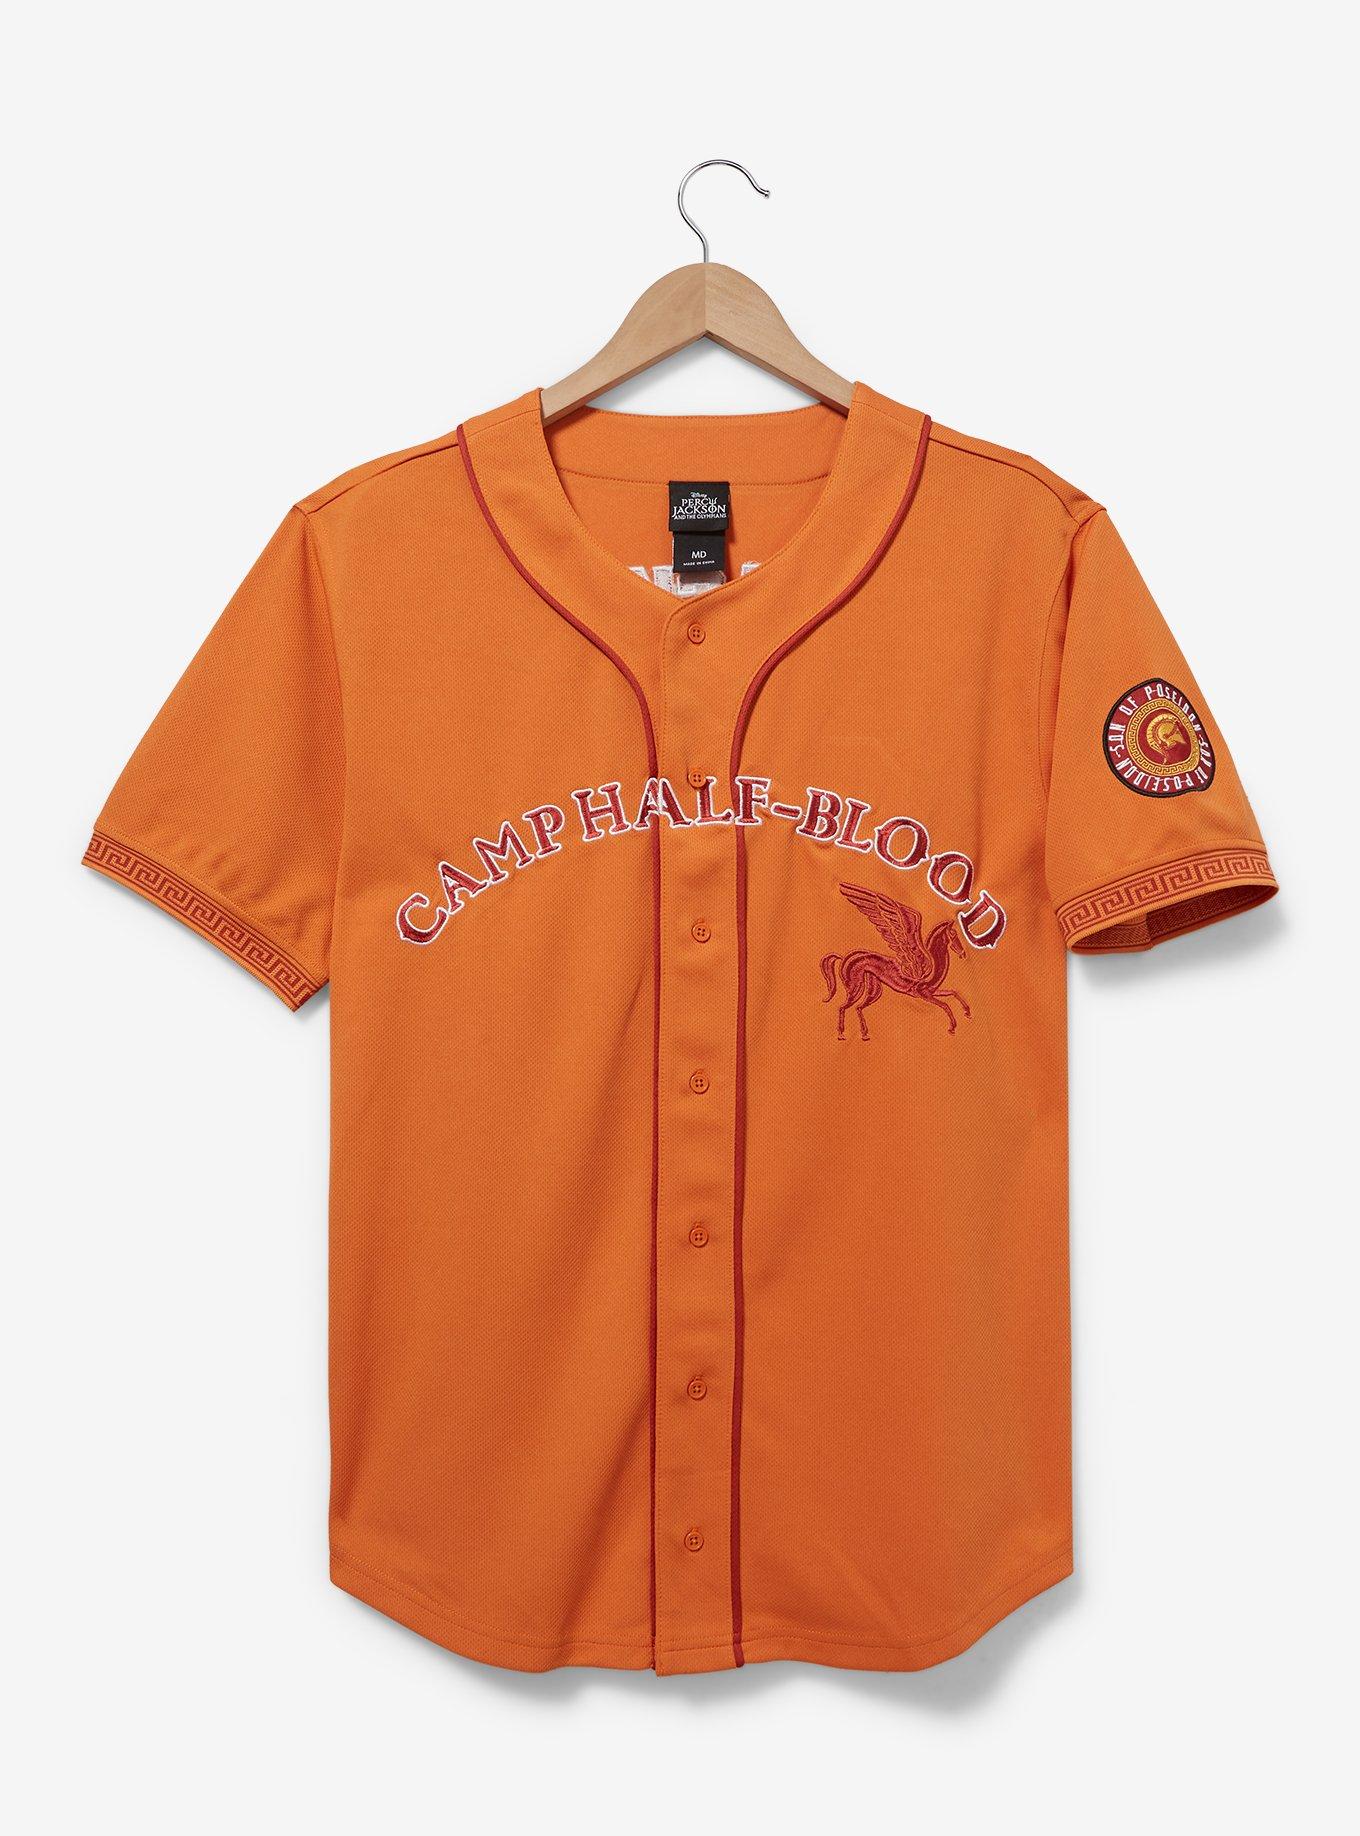 Percy Jackson and the Olympians Camp Half-Blood Baseball Jersey — BoxLunch Exclusive, , hi-res